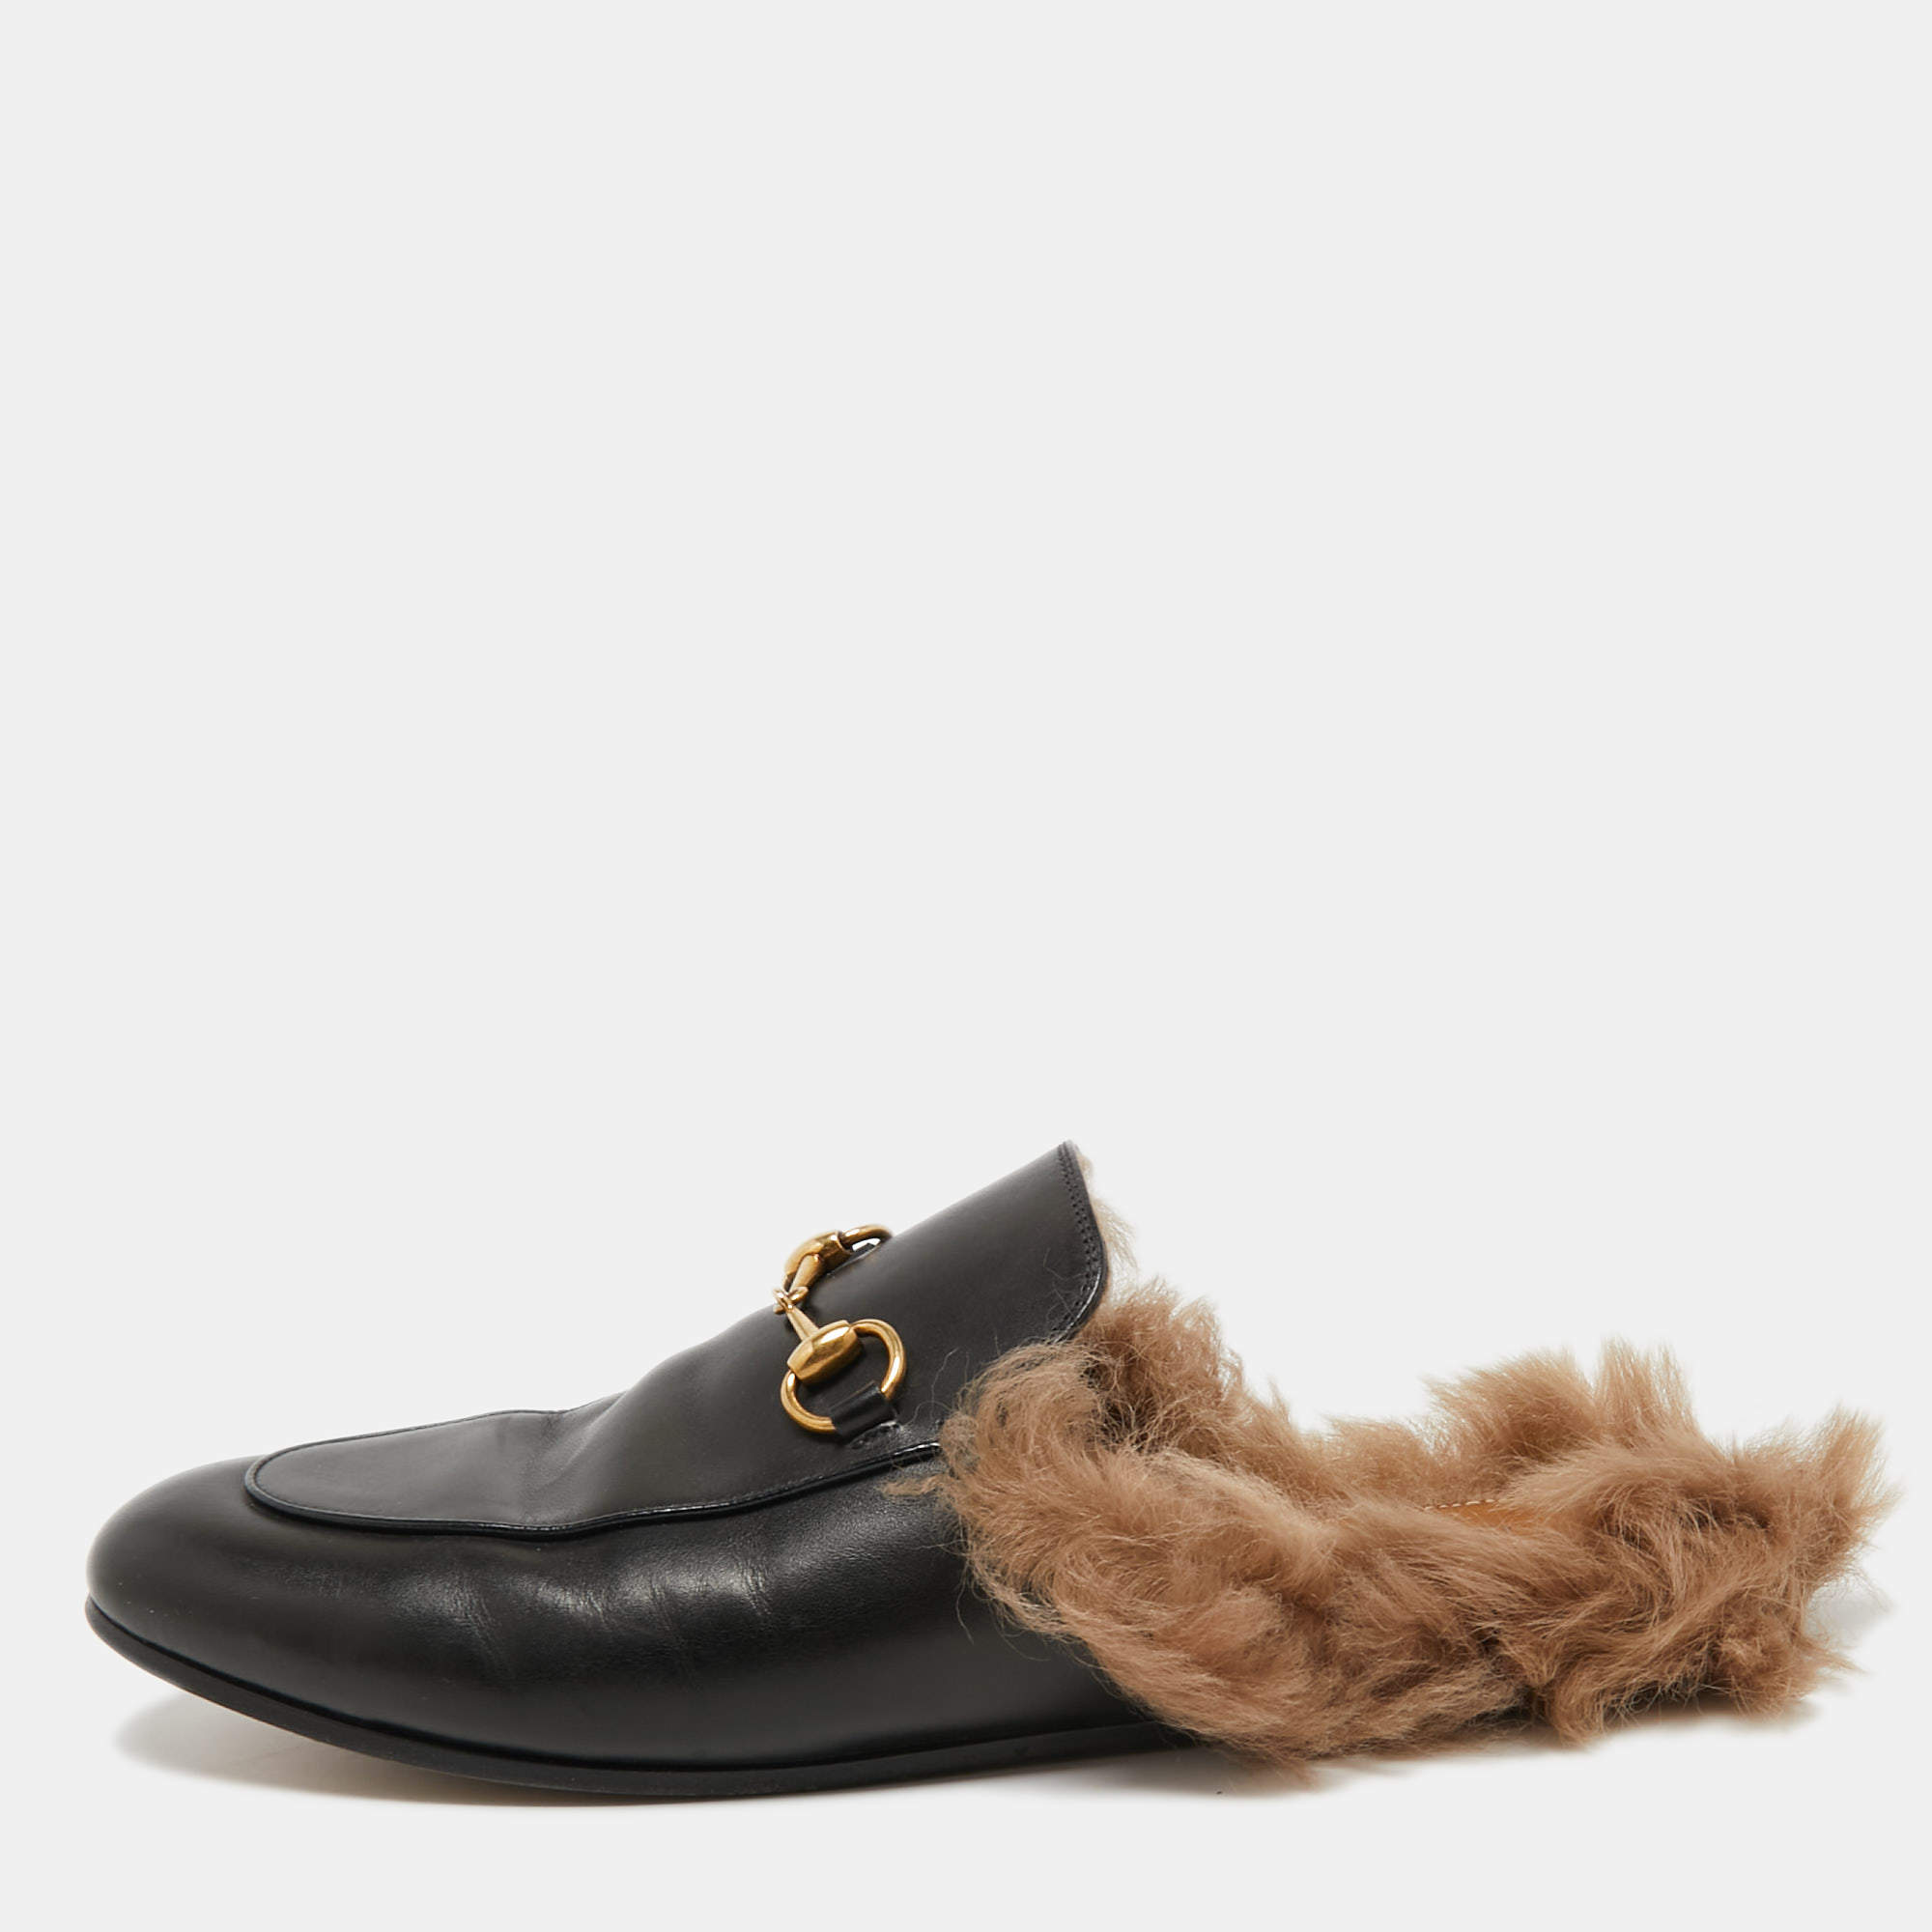 Gucci Black Leather and Fur Princetown Flat Mules Size 38